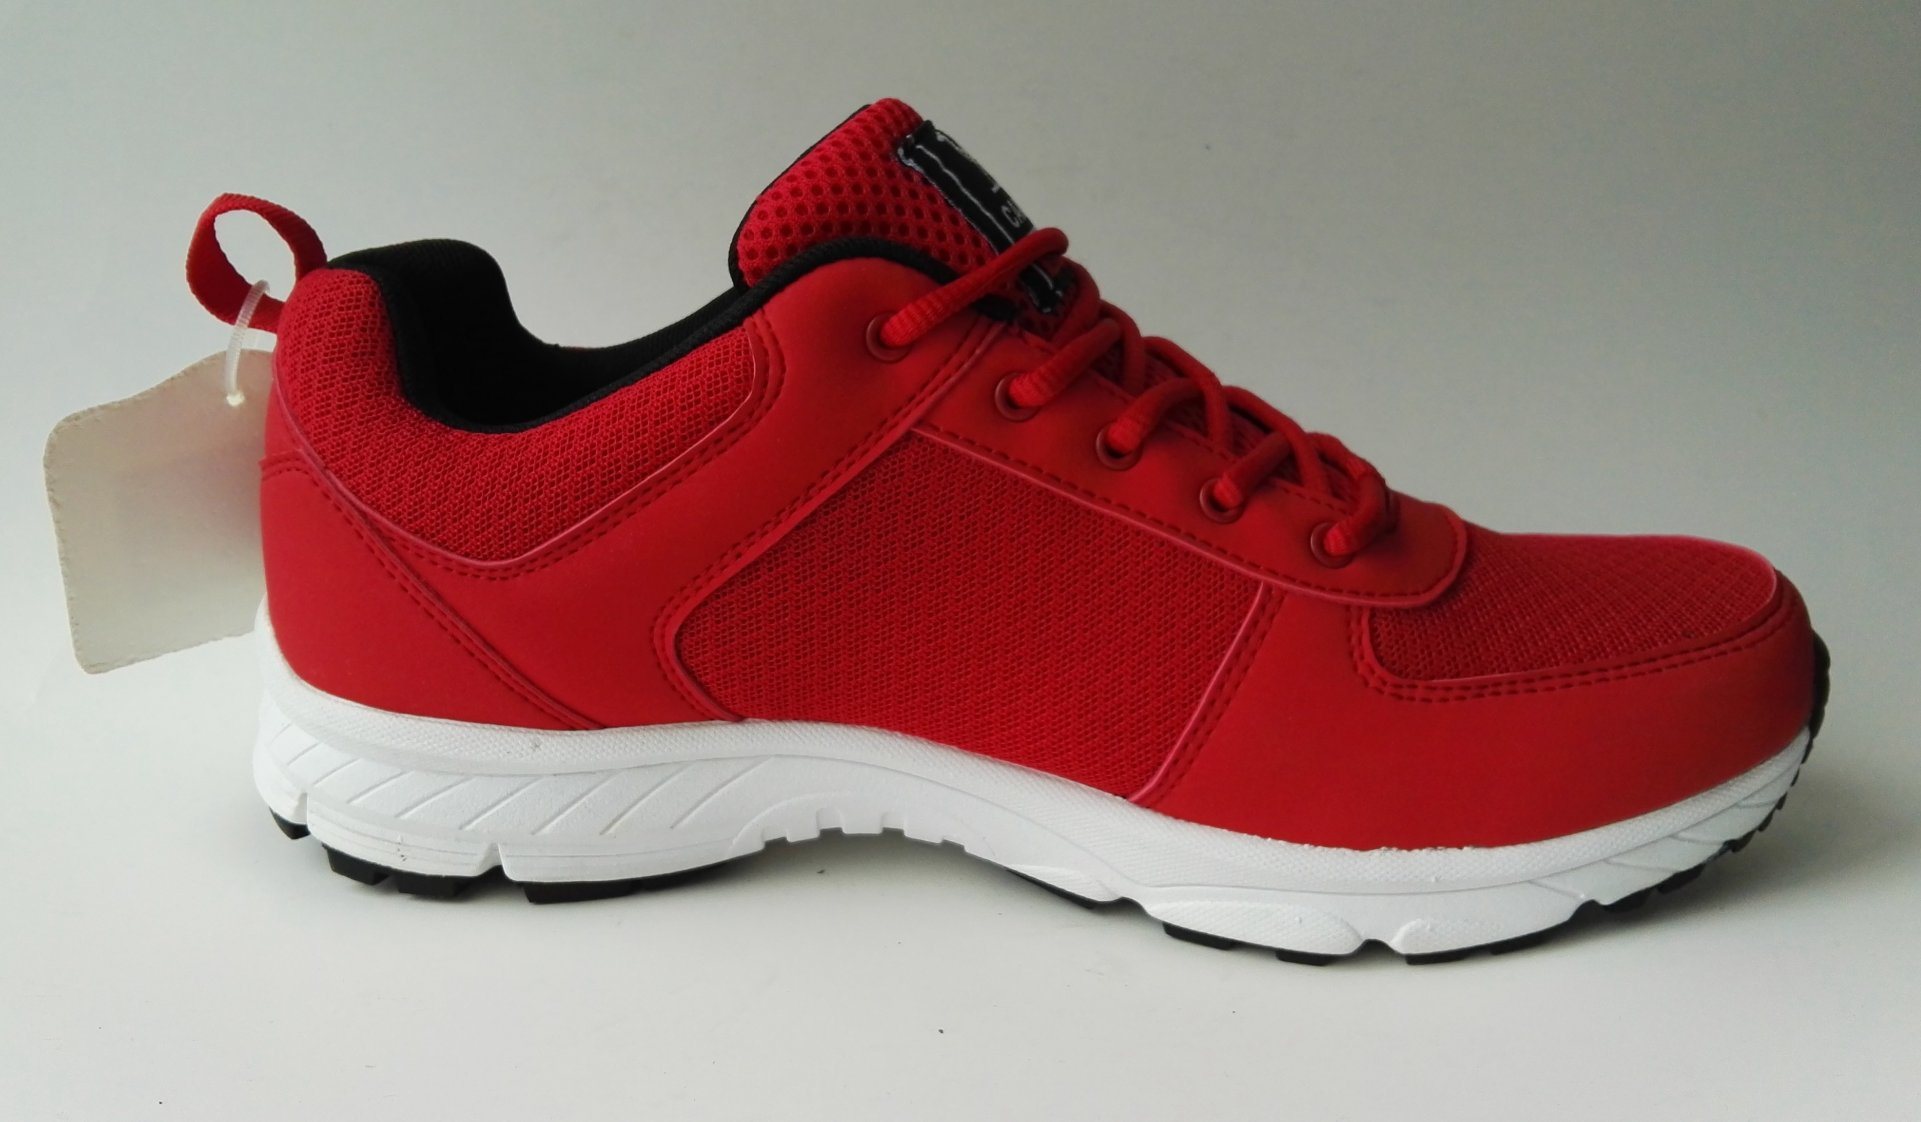 Fashion and Classical Running Shoes for Unisex of All Ages